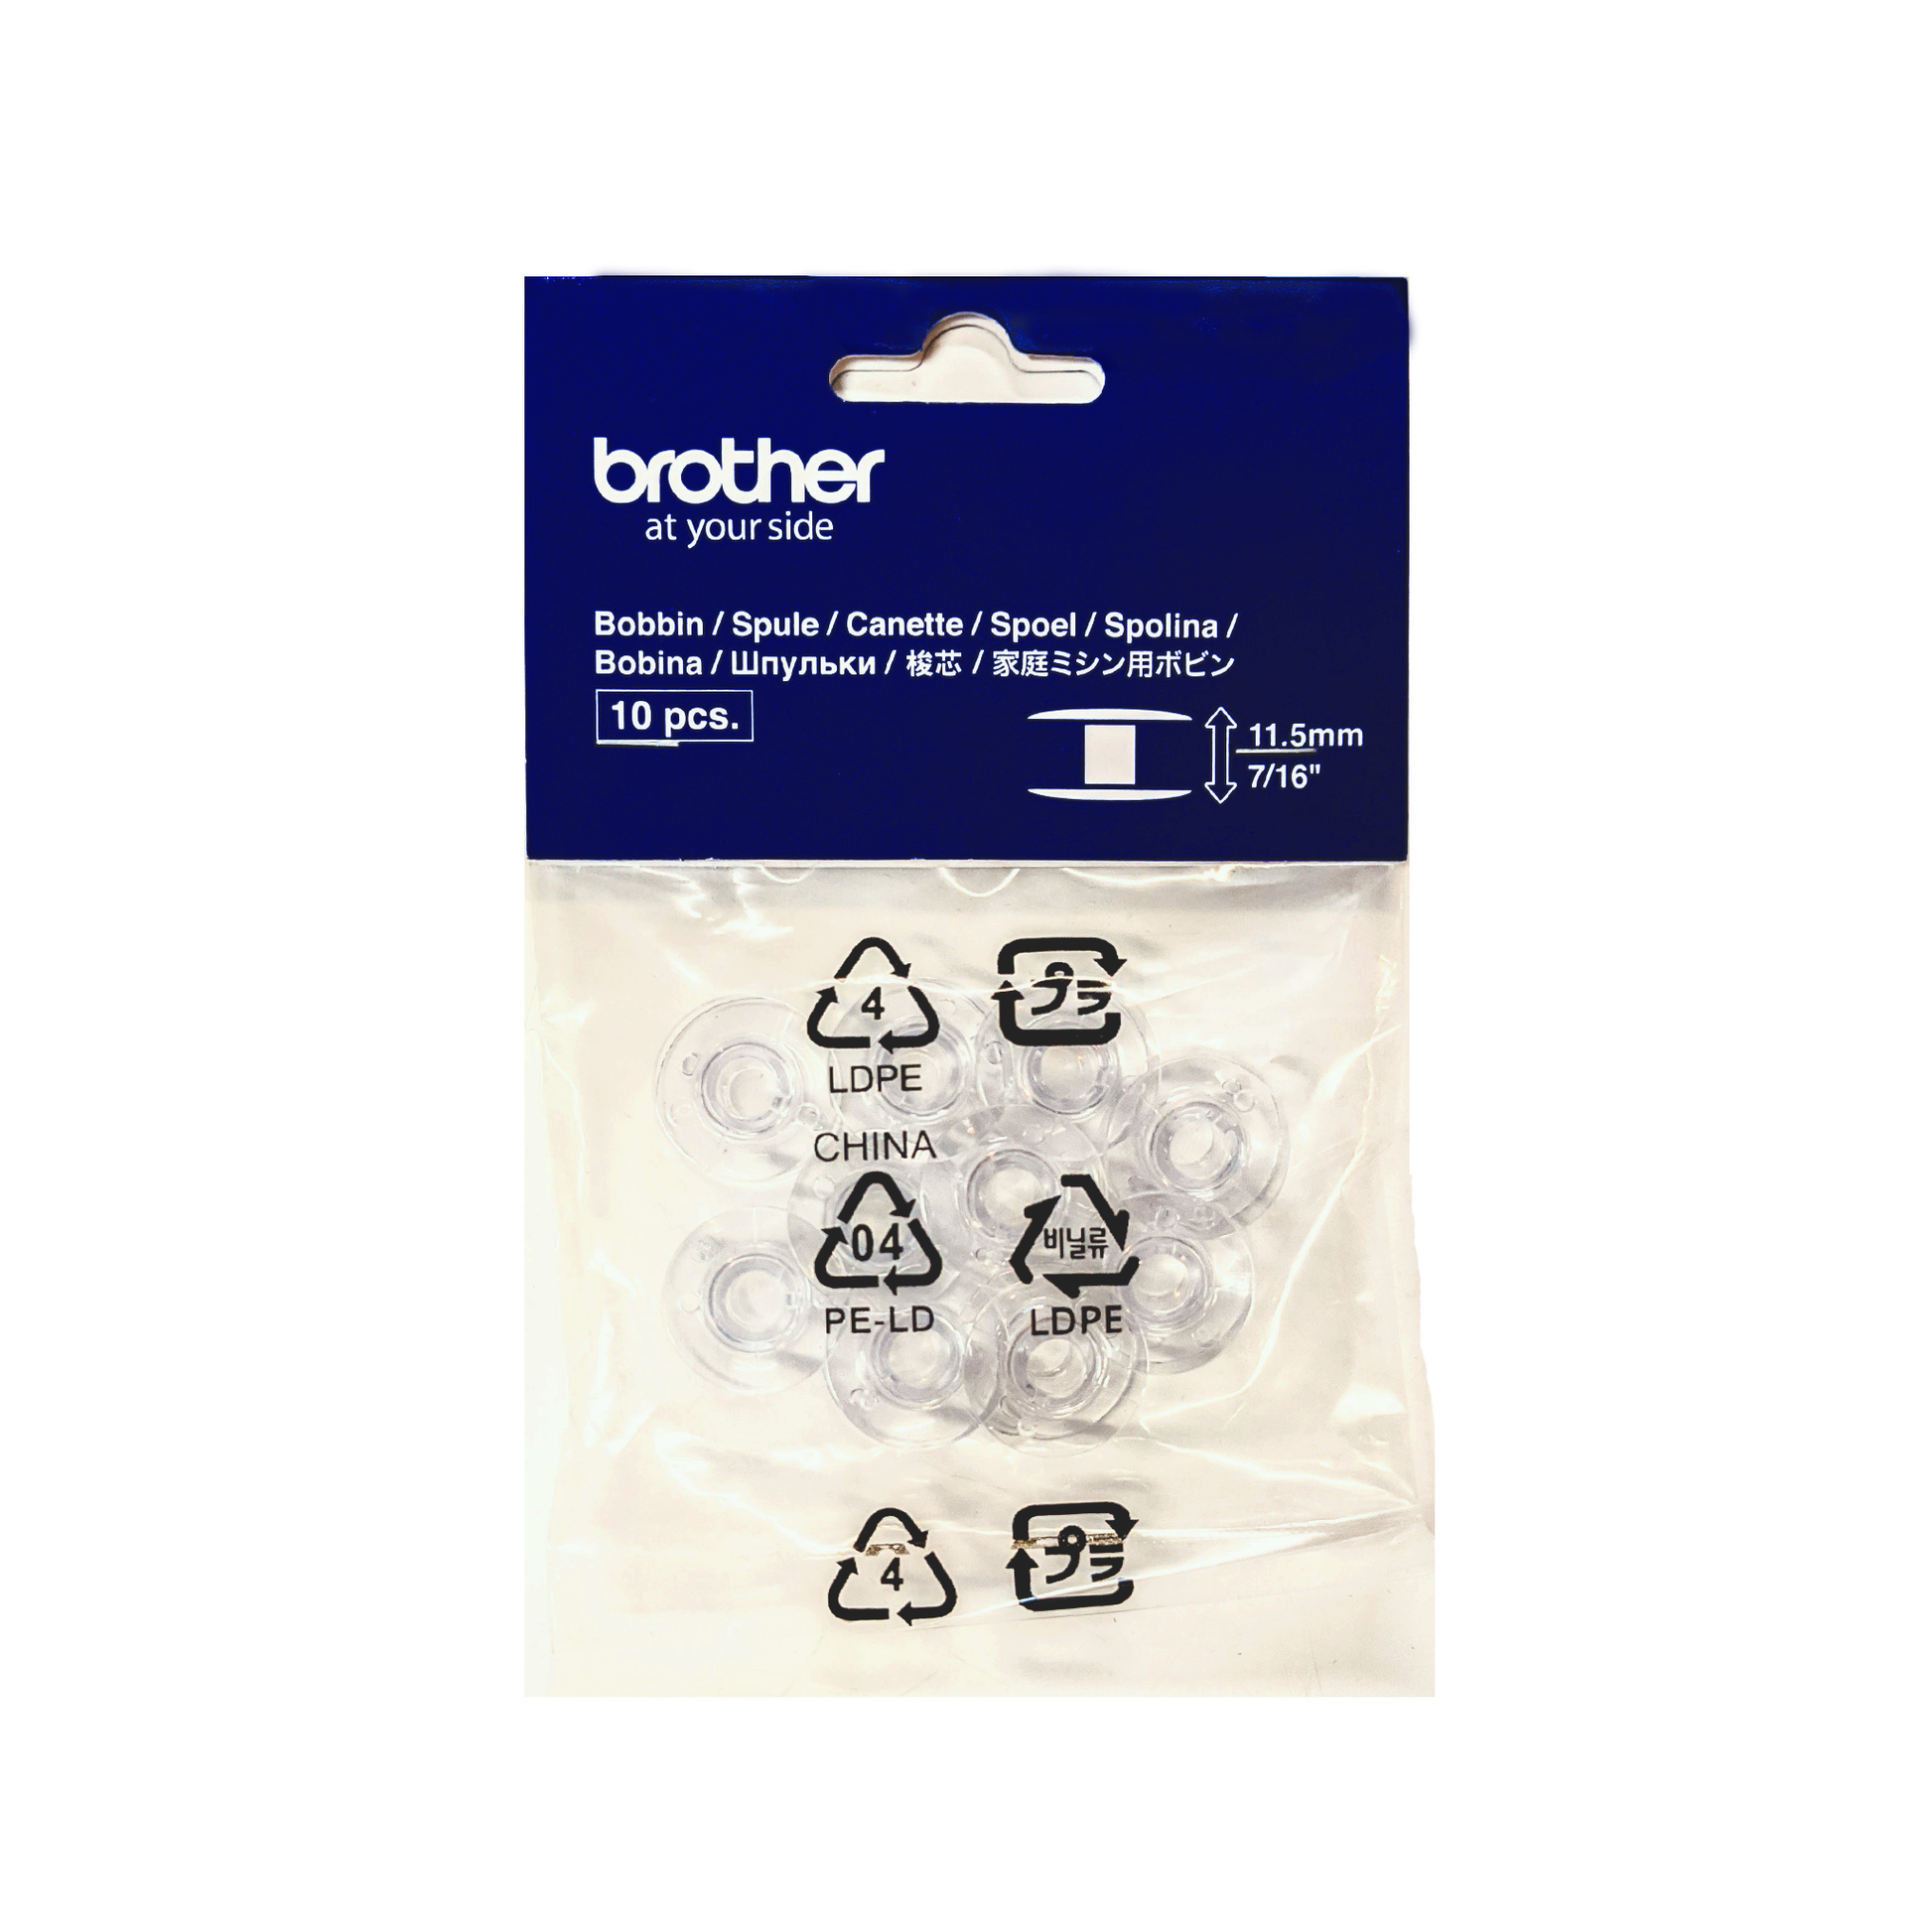 Brother Bobbins for Sewing Machines – Bobbin and Ink